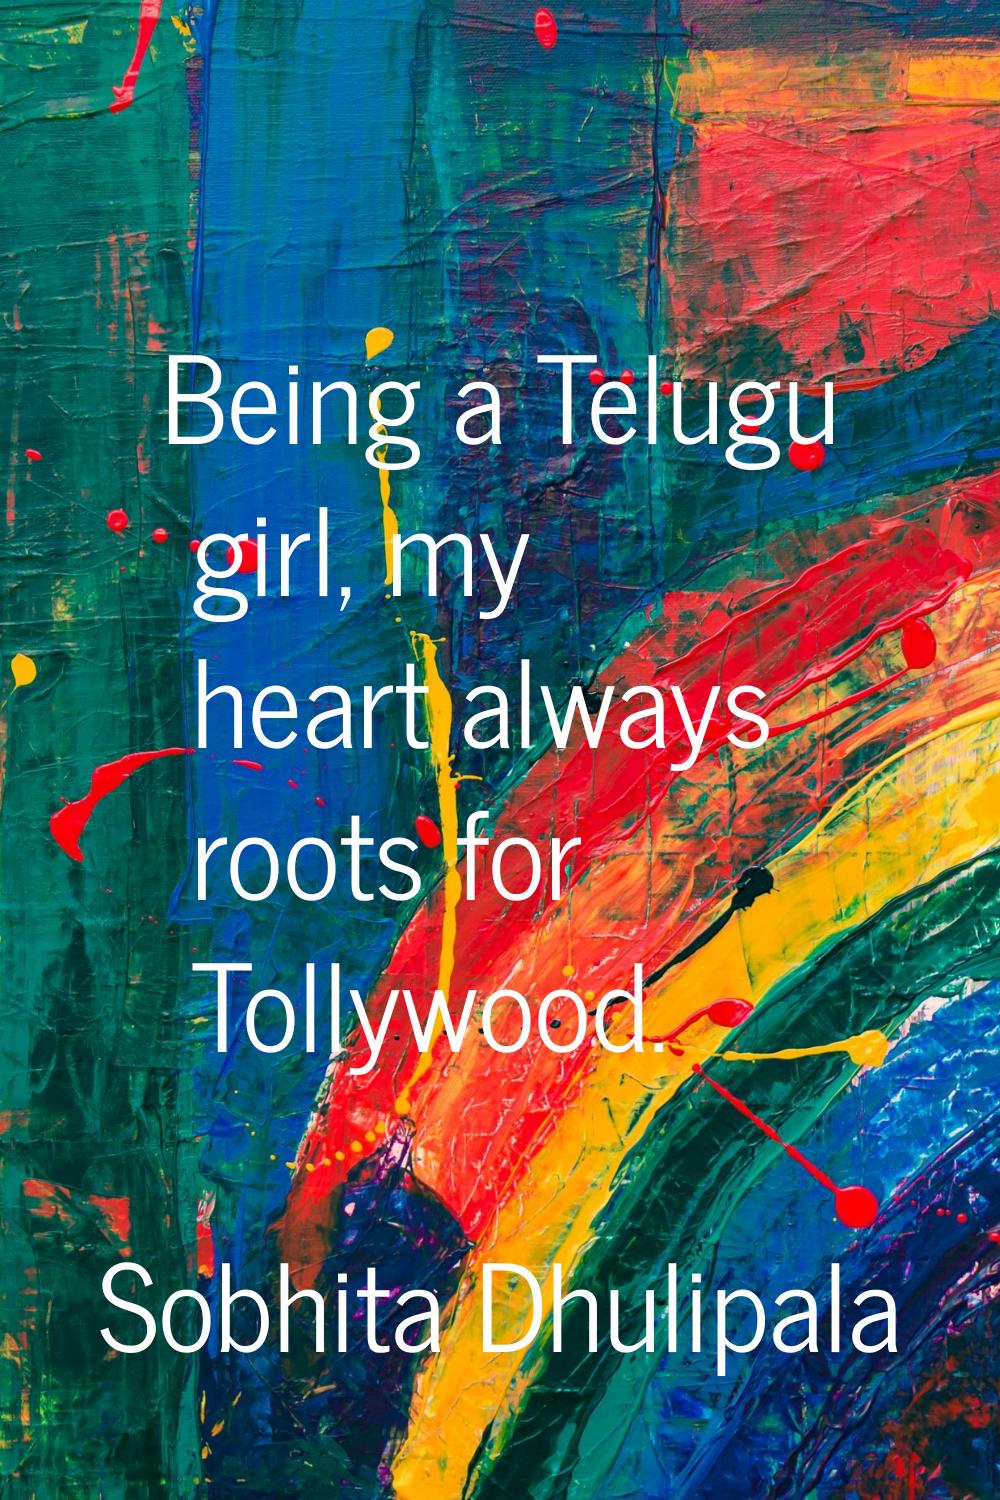 Being a Telugu girl, my heart always roots for Tollywood.